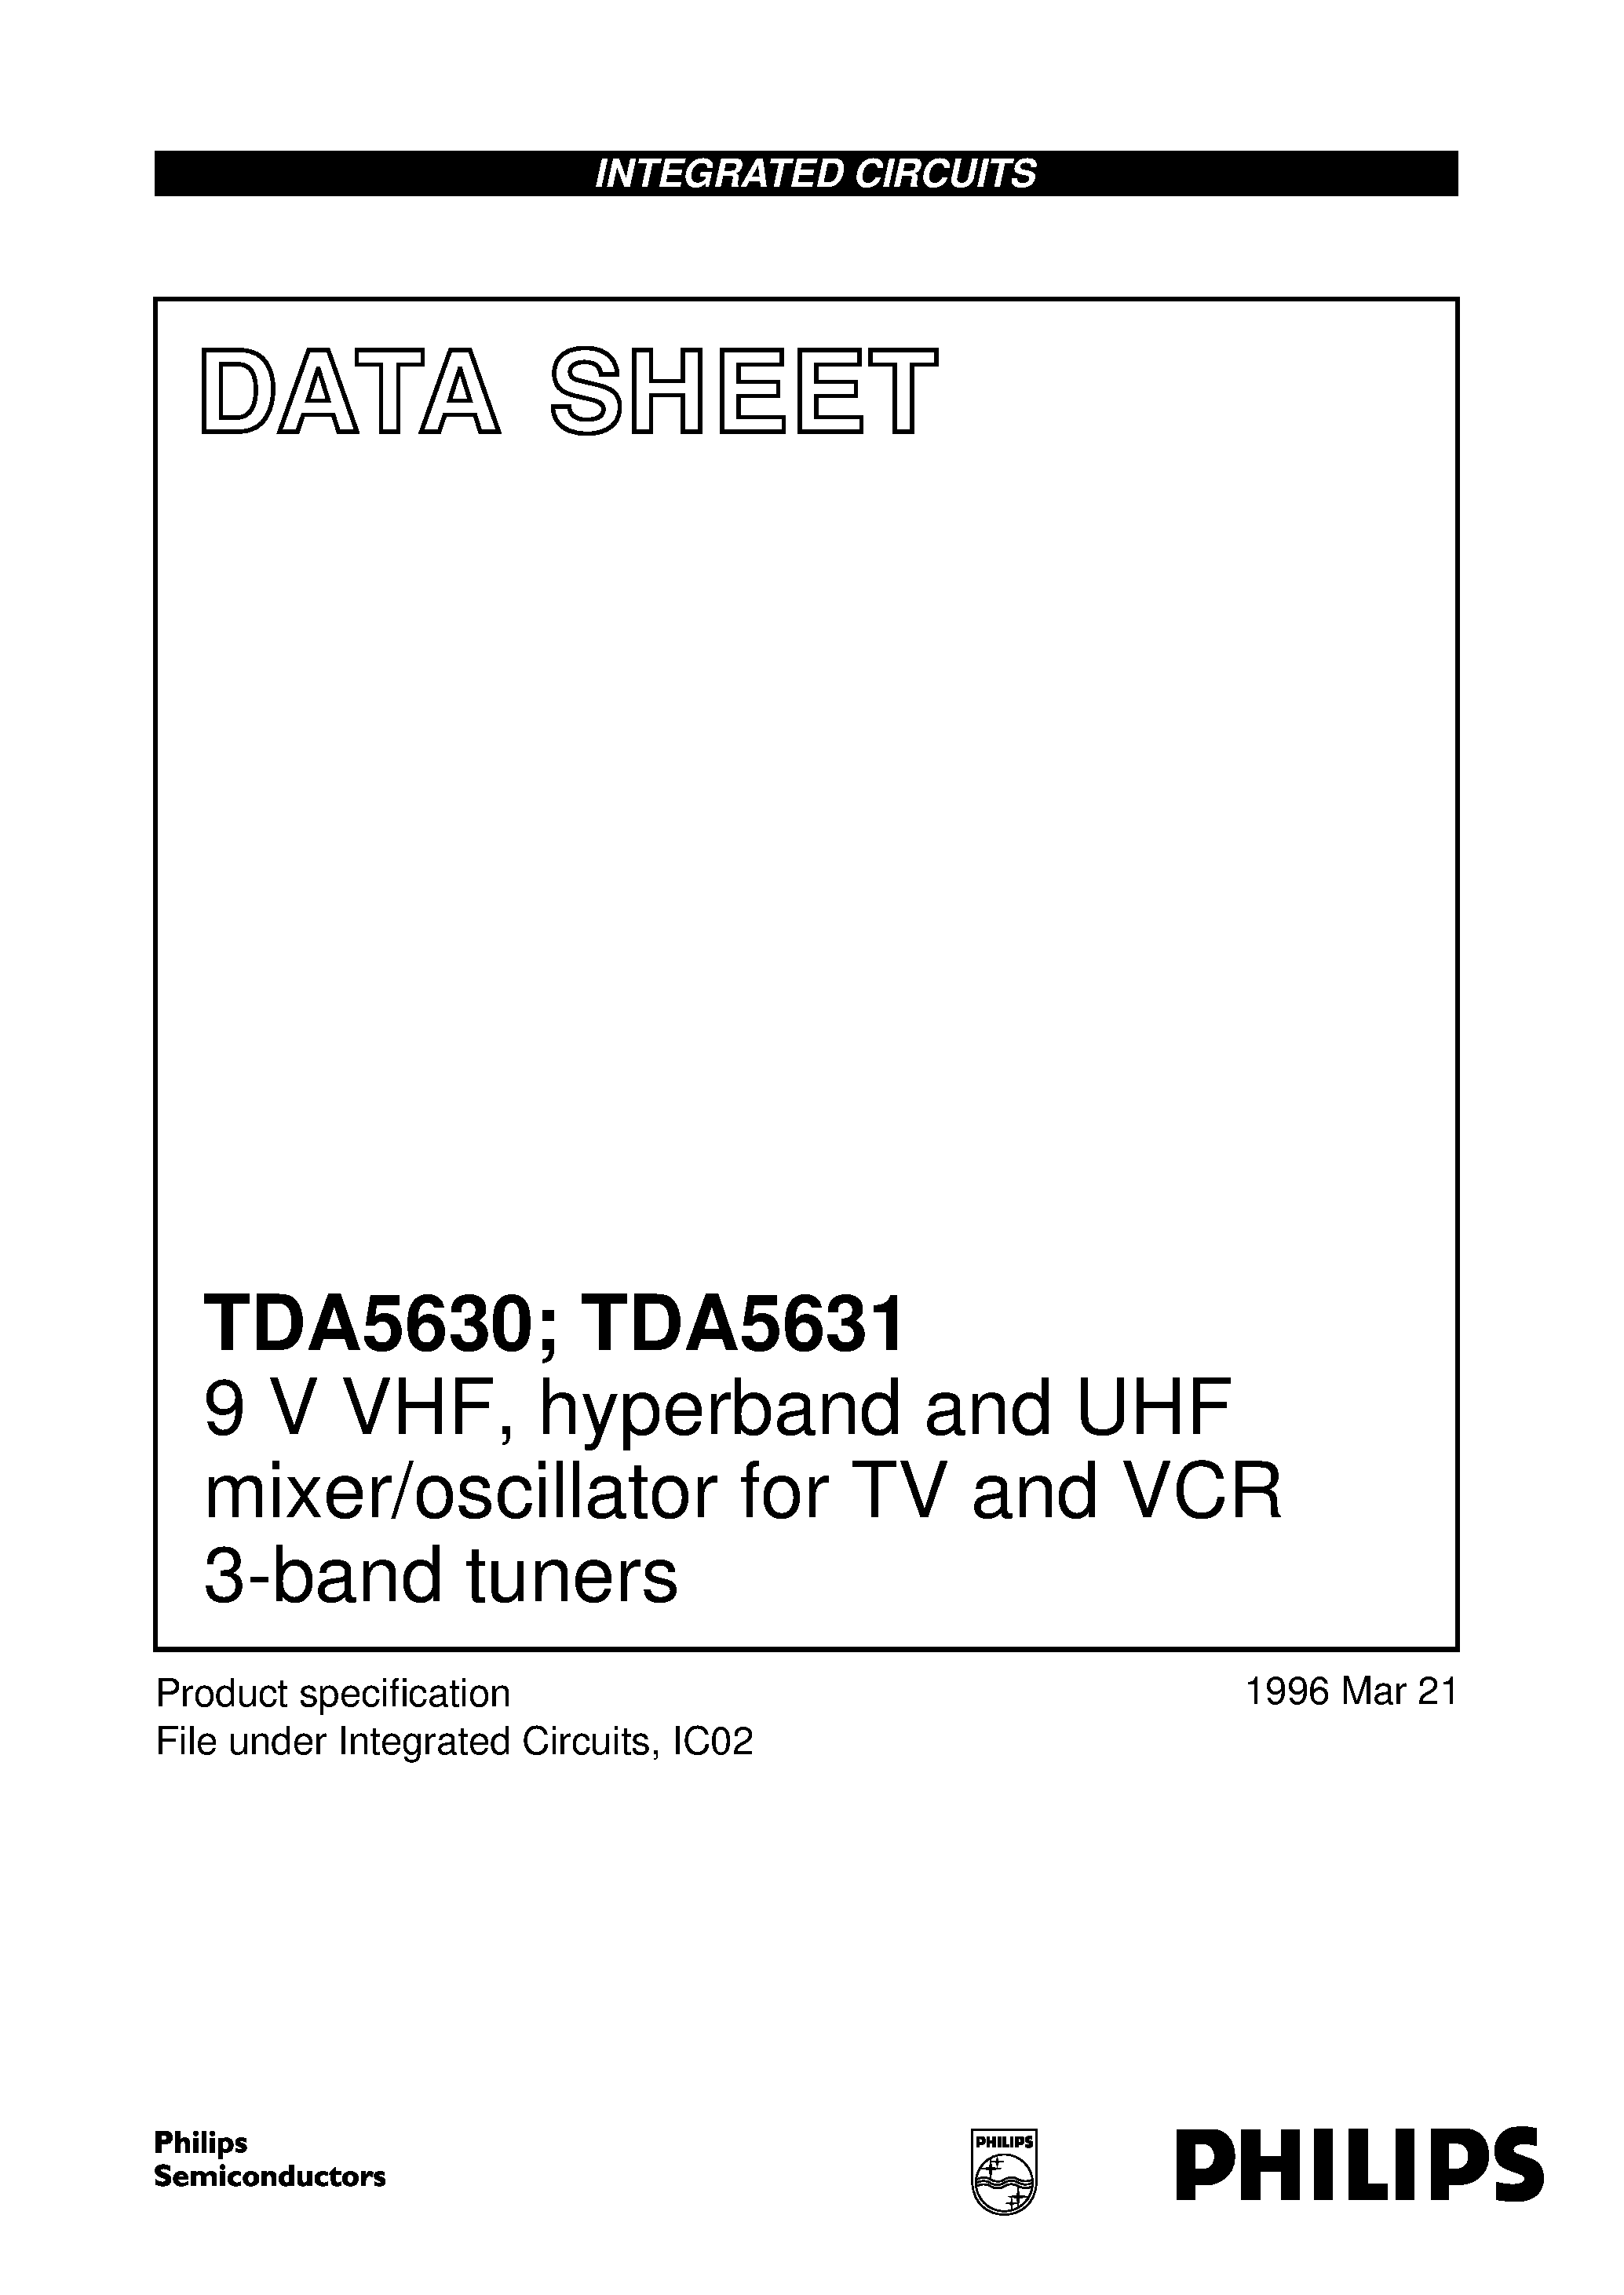 Datasheet TDA5631T - 9 V VHF/ hyperband and UHF mixer/oscillator for TV and VCR 3-band tuners page 1